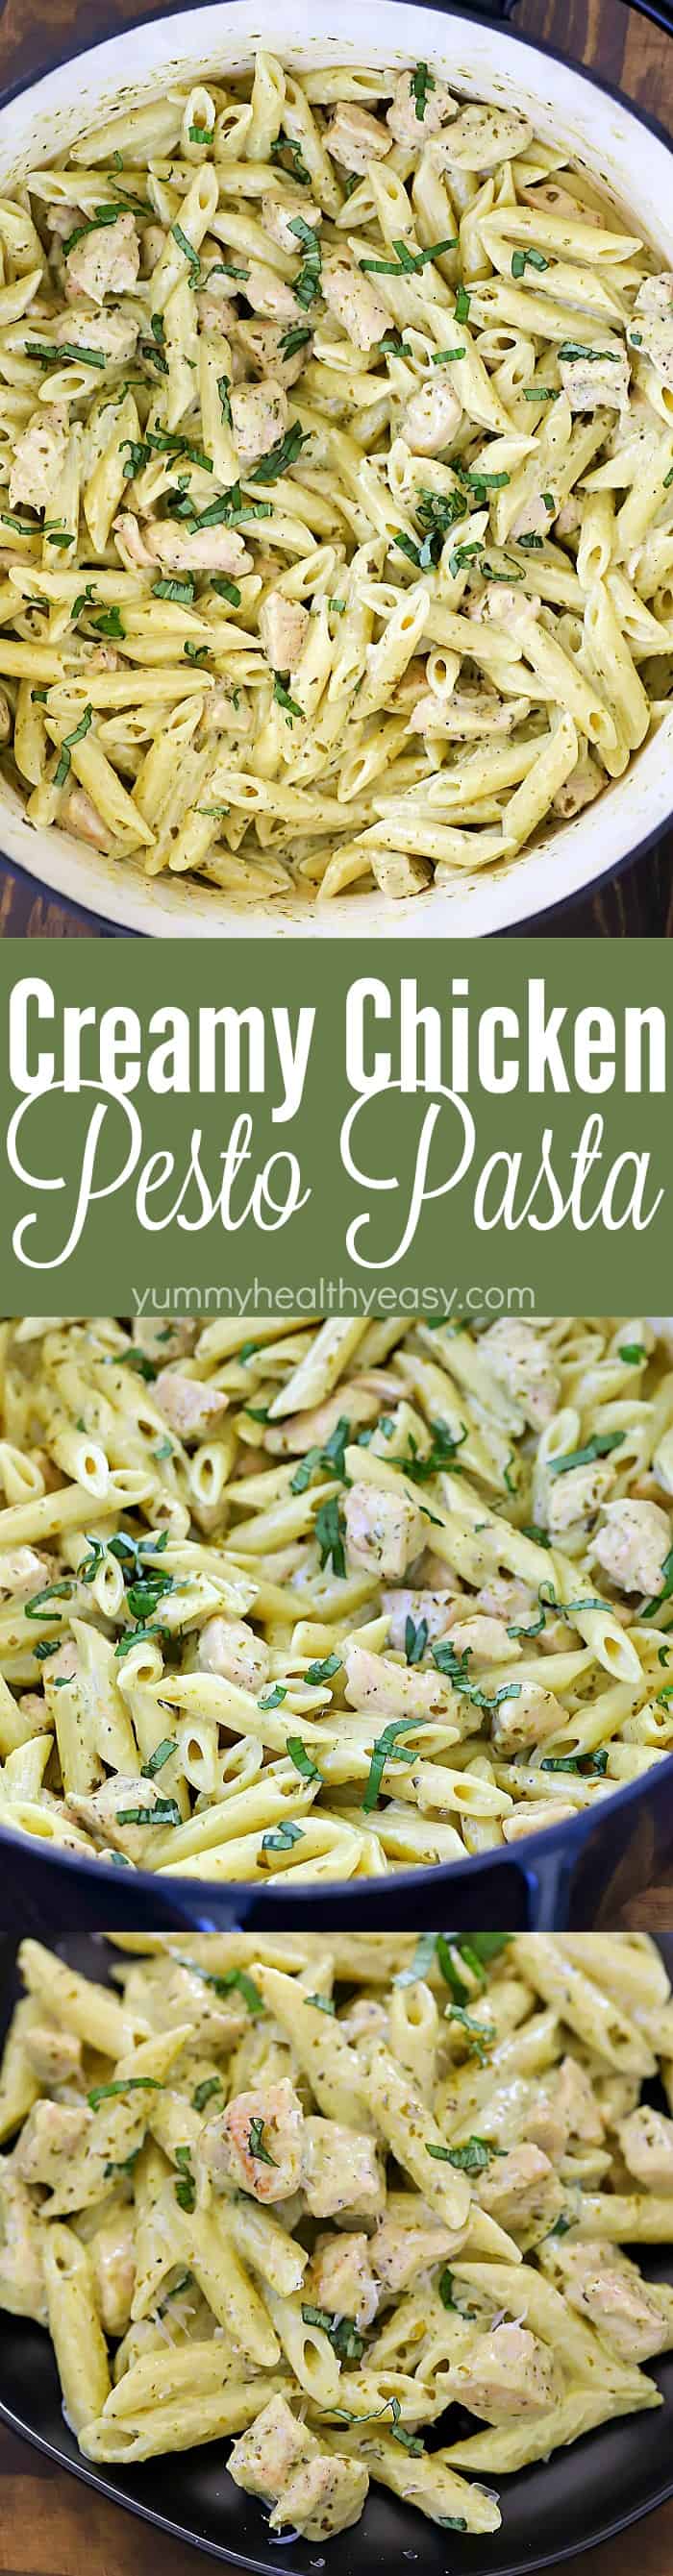 This Creamy Chicken Pesto Pasta Recipe is seriously the BEST dinner recipe ever! It's super easy to make, only requires only a few ingredients, and tastes amazing! This is my family's favorite pasta dinner recipe!